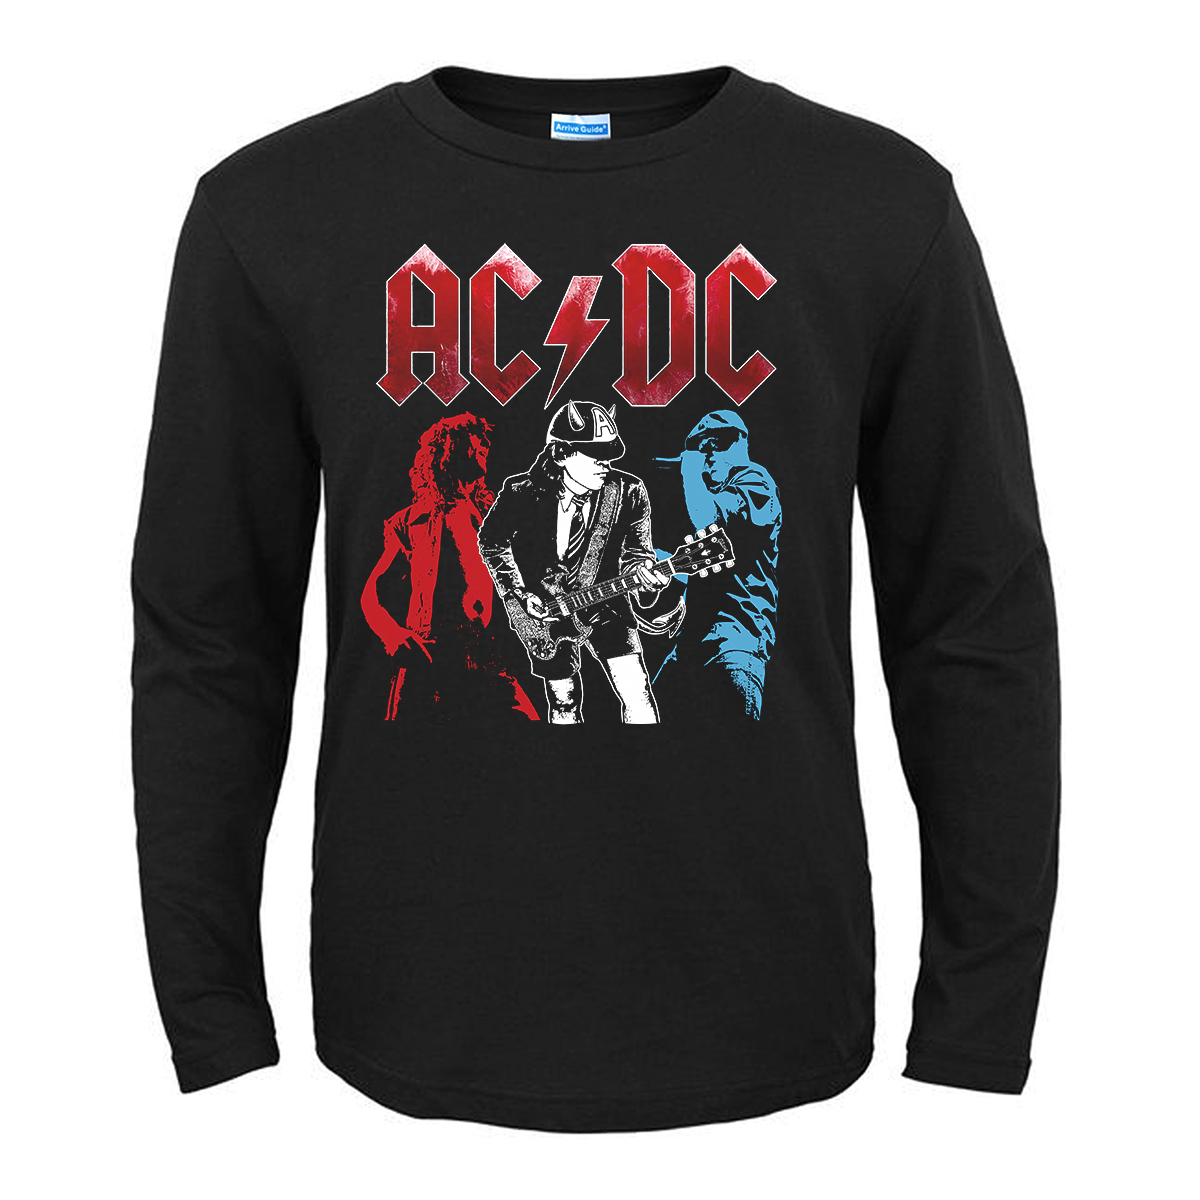 Collectibles T-Shirt Acdc Rock Band Artwork